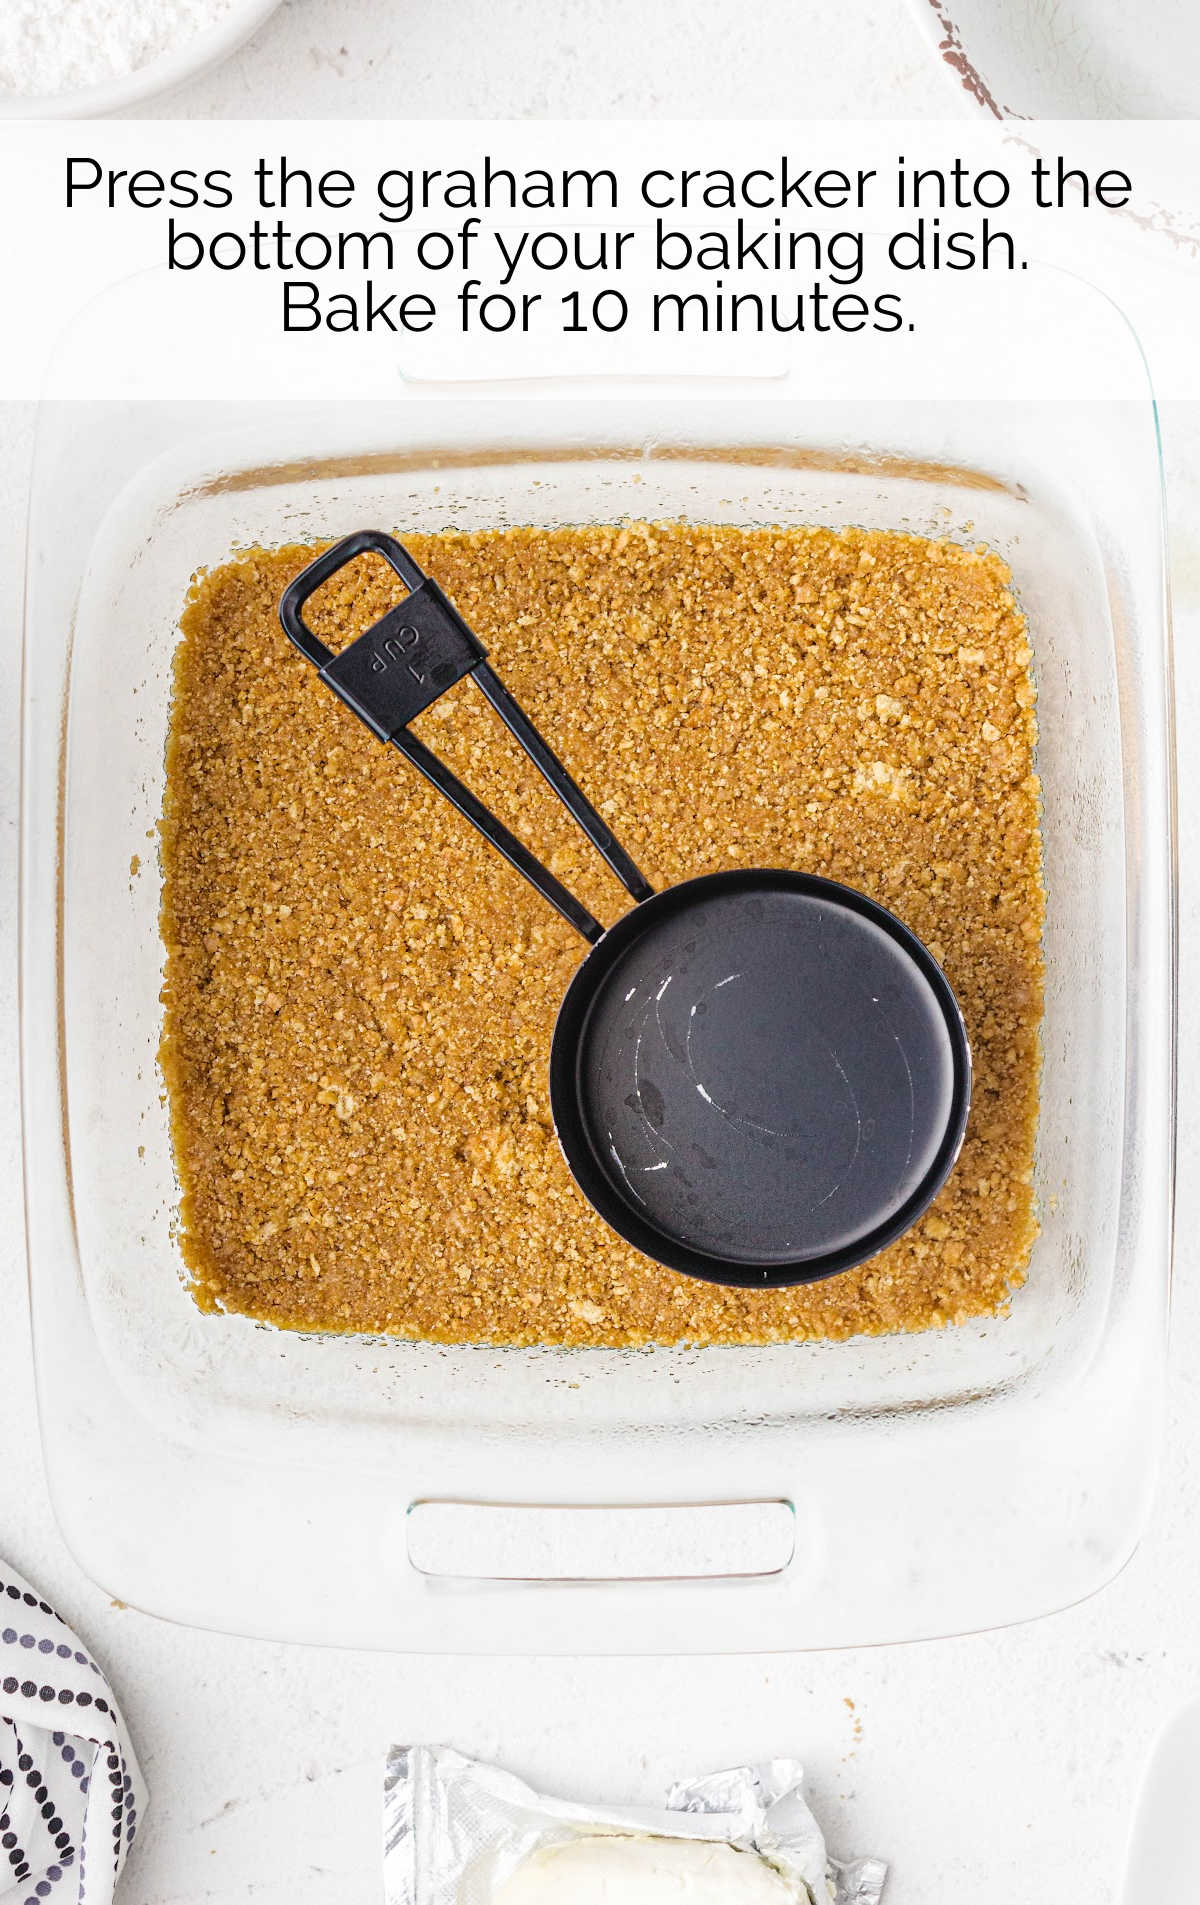 graham cracker pressed into the bottom of a baking dish